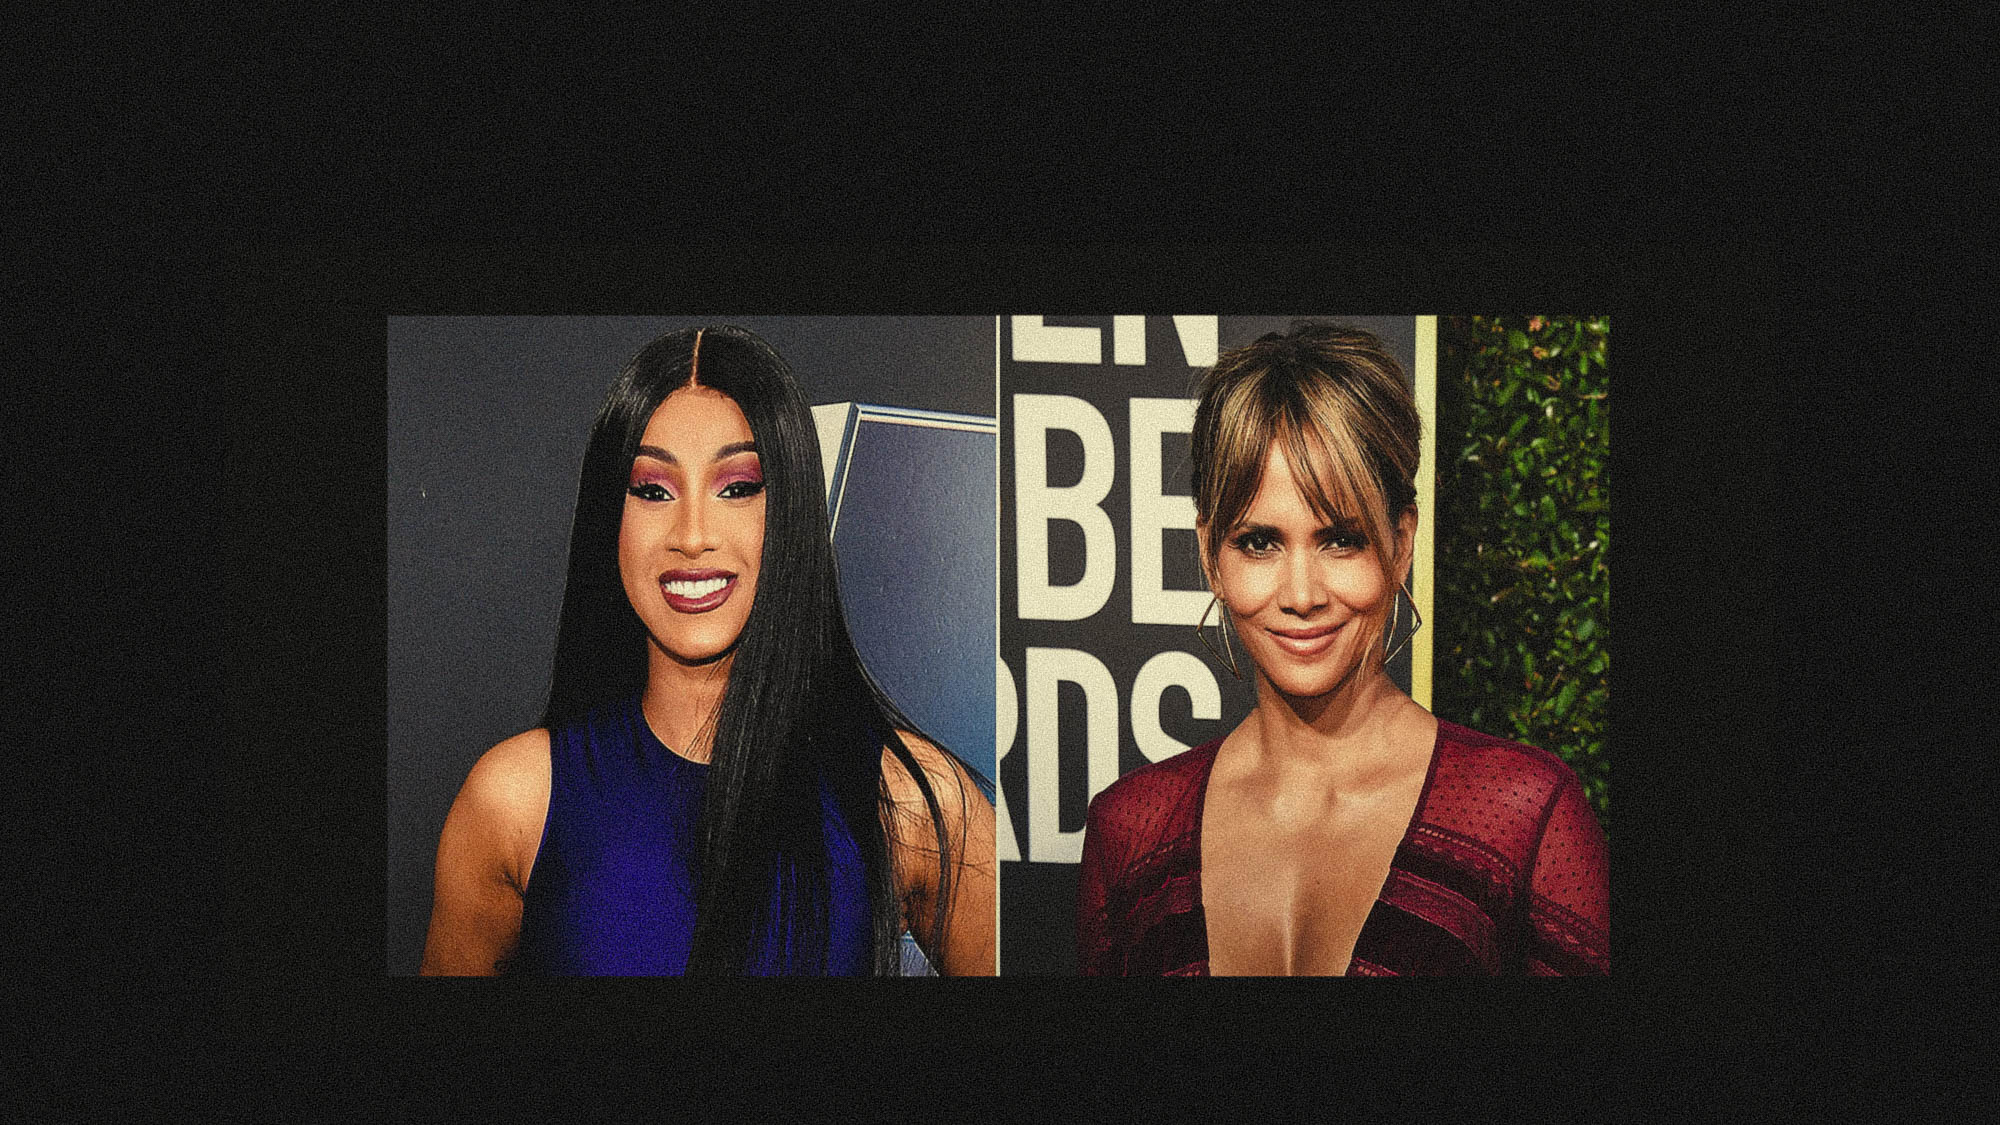 Halle Berry New debut series "5 Rounds" with Cardi B - Episode 1